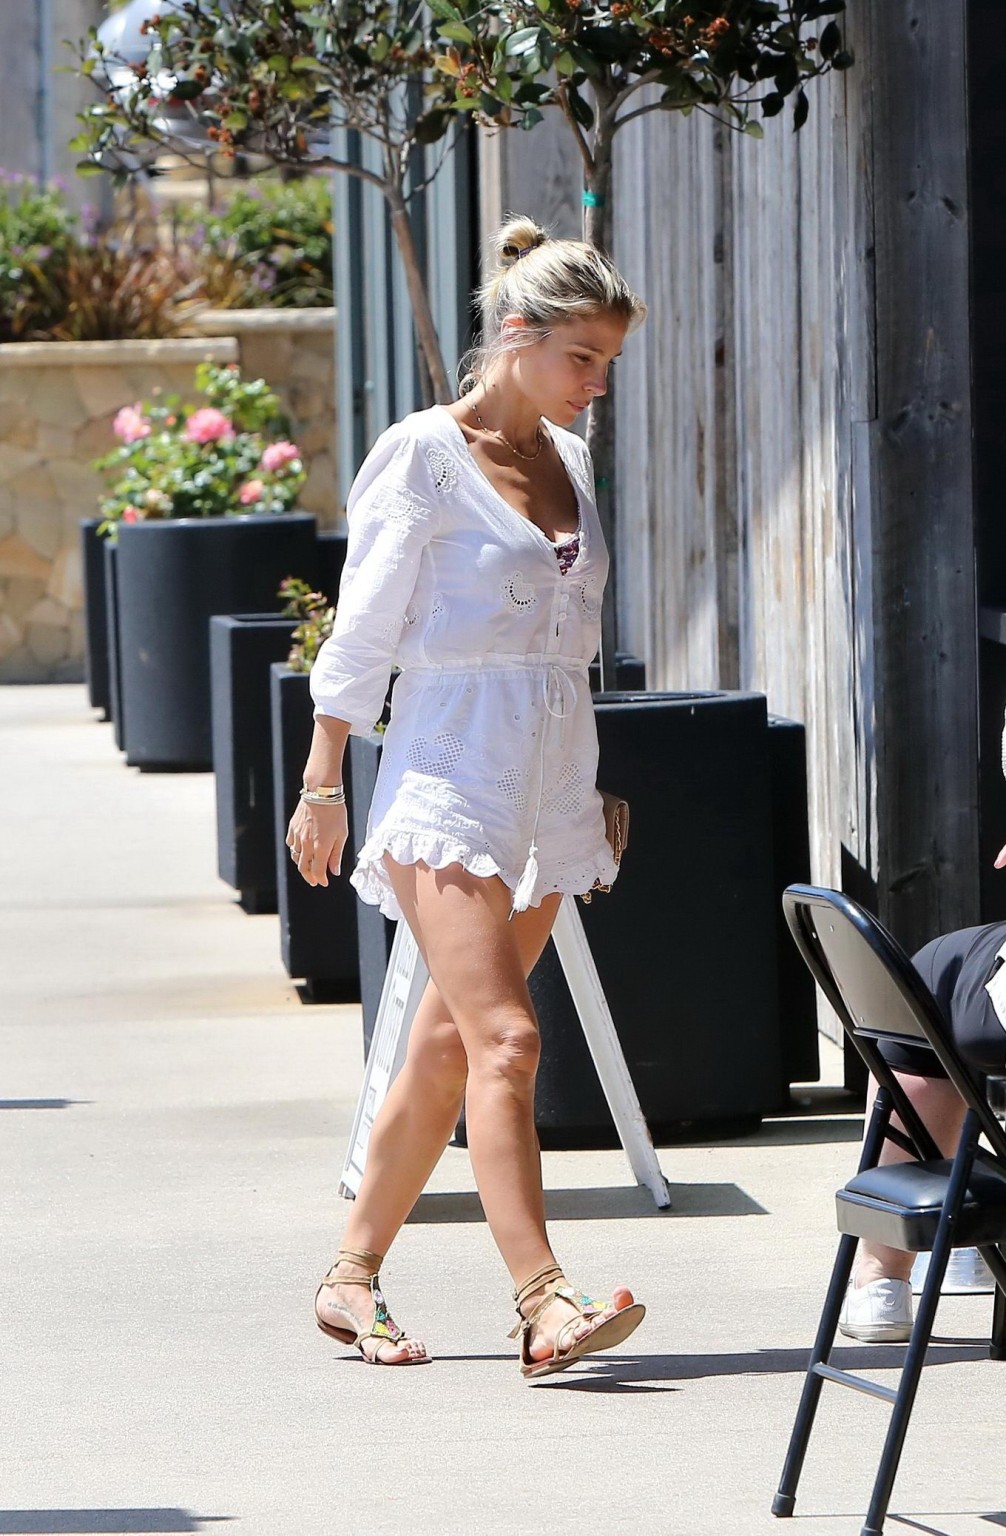 Elsa Pataky leggy  cleavy wearing a romper suit out for shopping #75156205